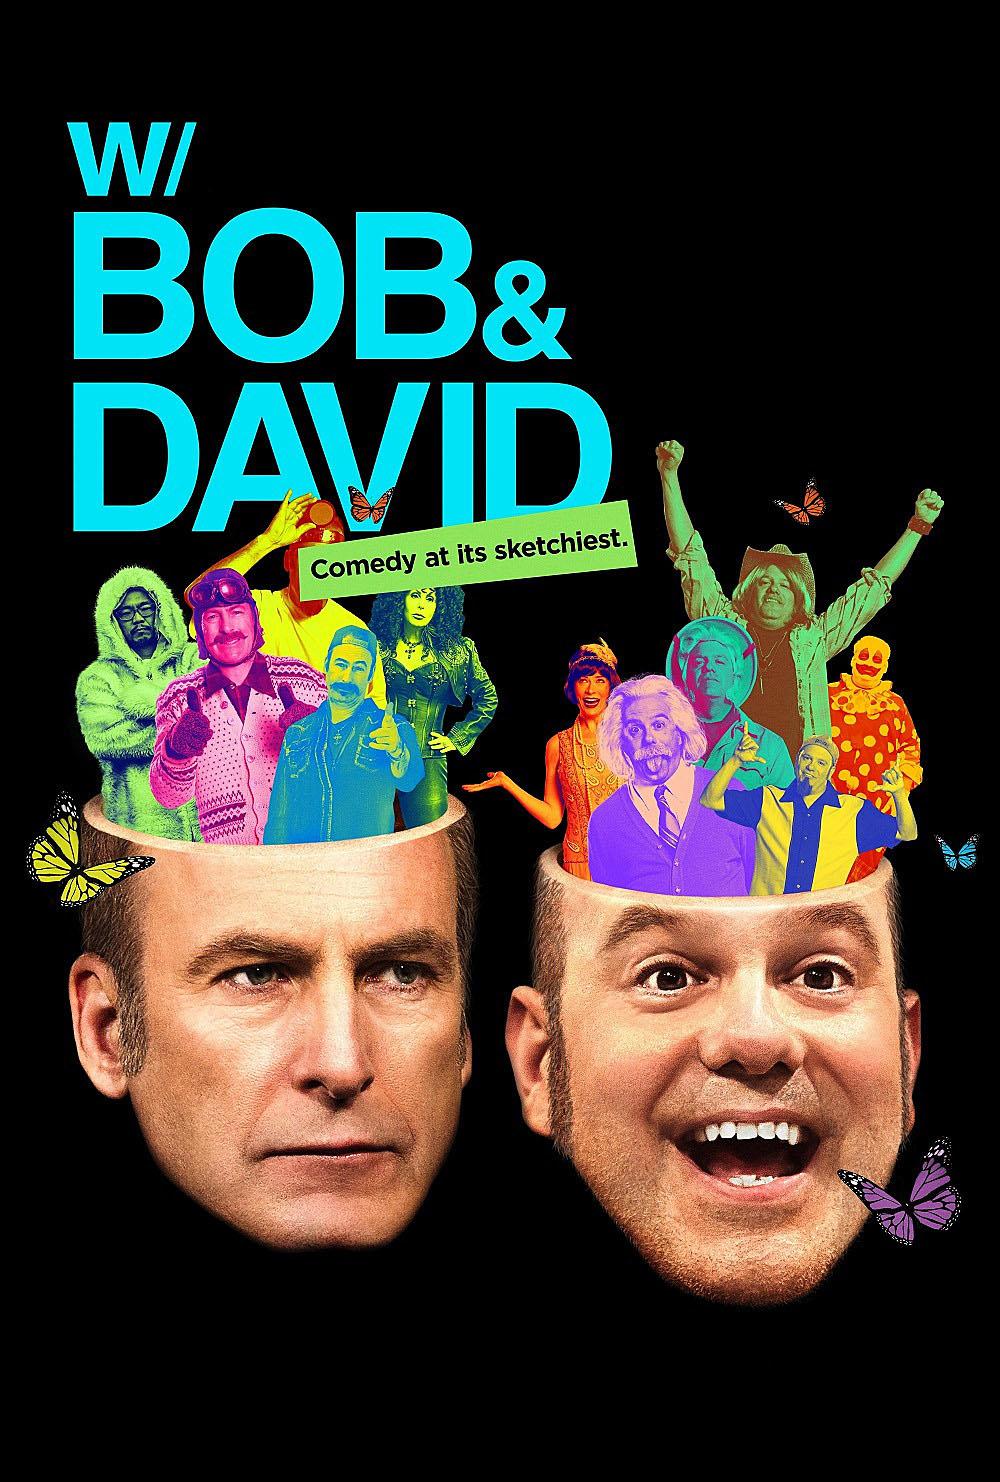 TV ratings for W/ Bob & David in Mexico. Netflix TV series